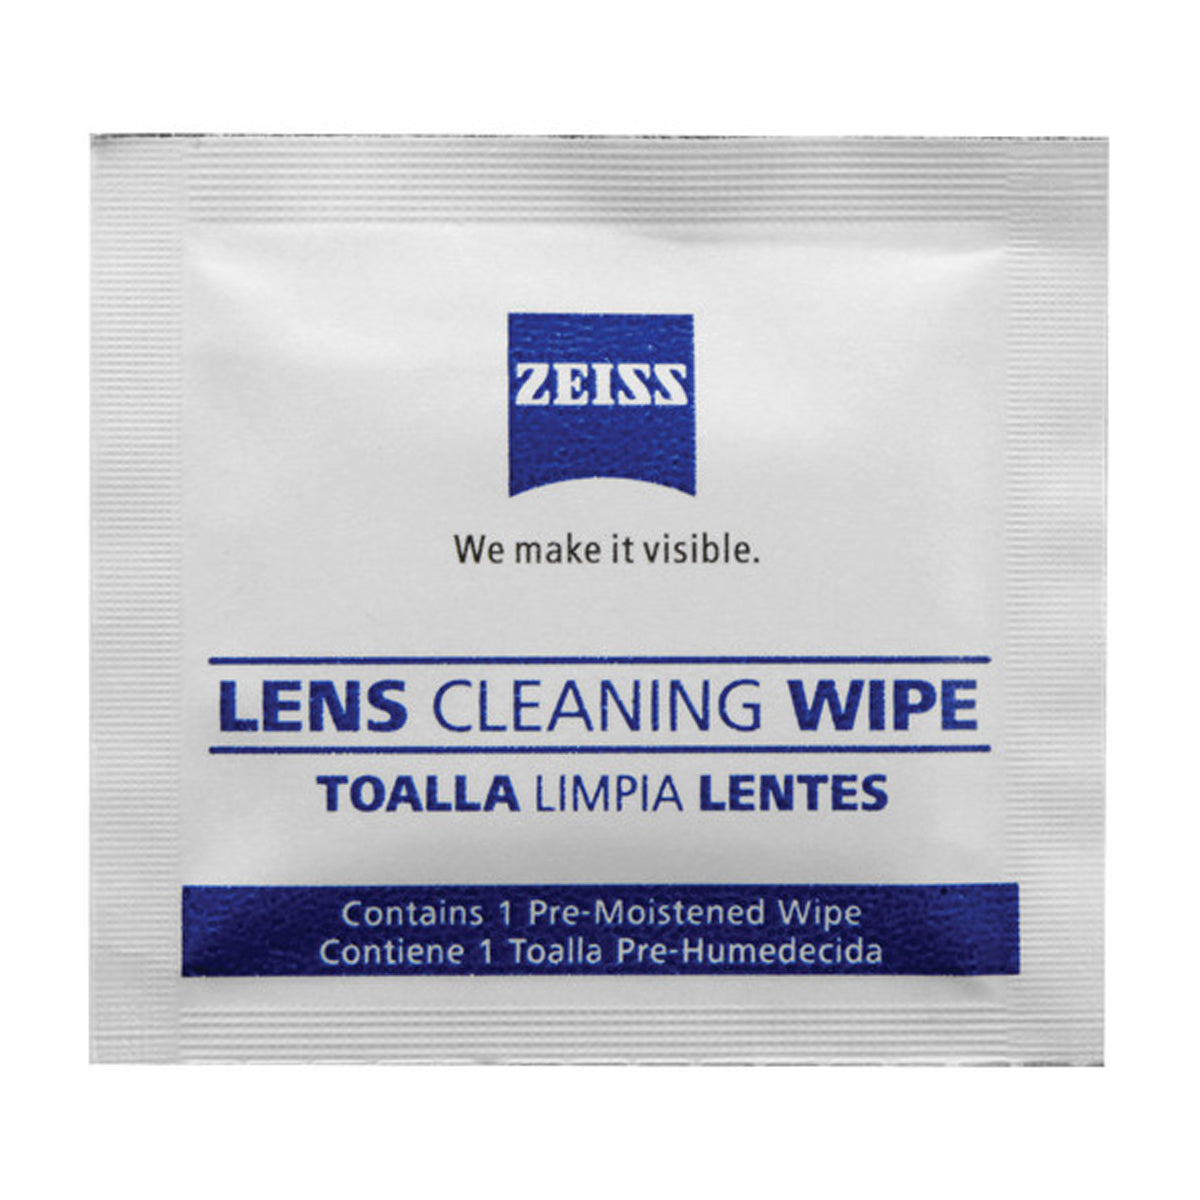 Zeiss Lens Cleaning Wipes (60 Count) in Zeiss Lens Cleaning Wipes (60 Count) by Zeiss | Optics - goHUNT Shop by GOHUNT | Zeiss - GOHUNT Shop